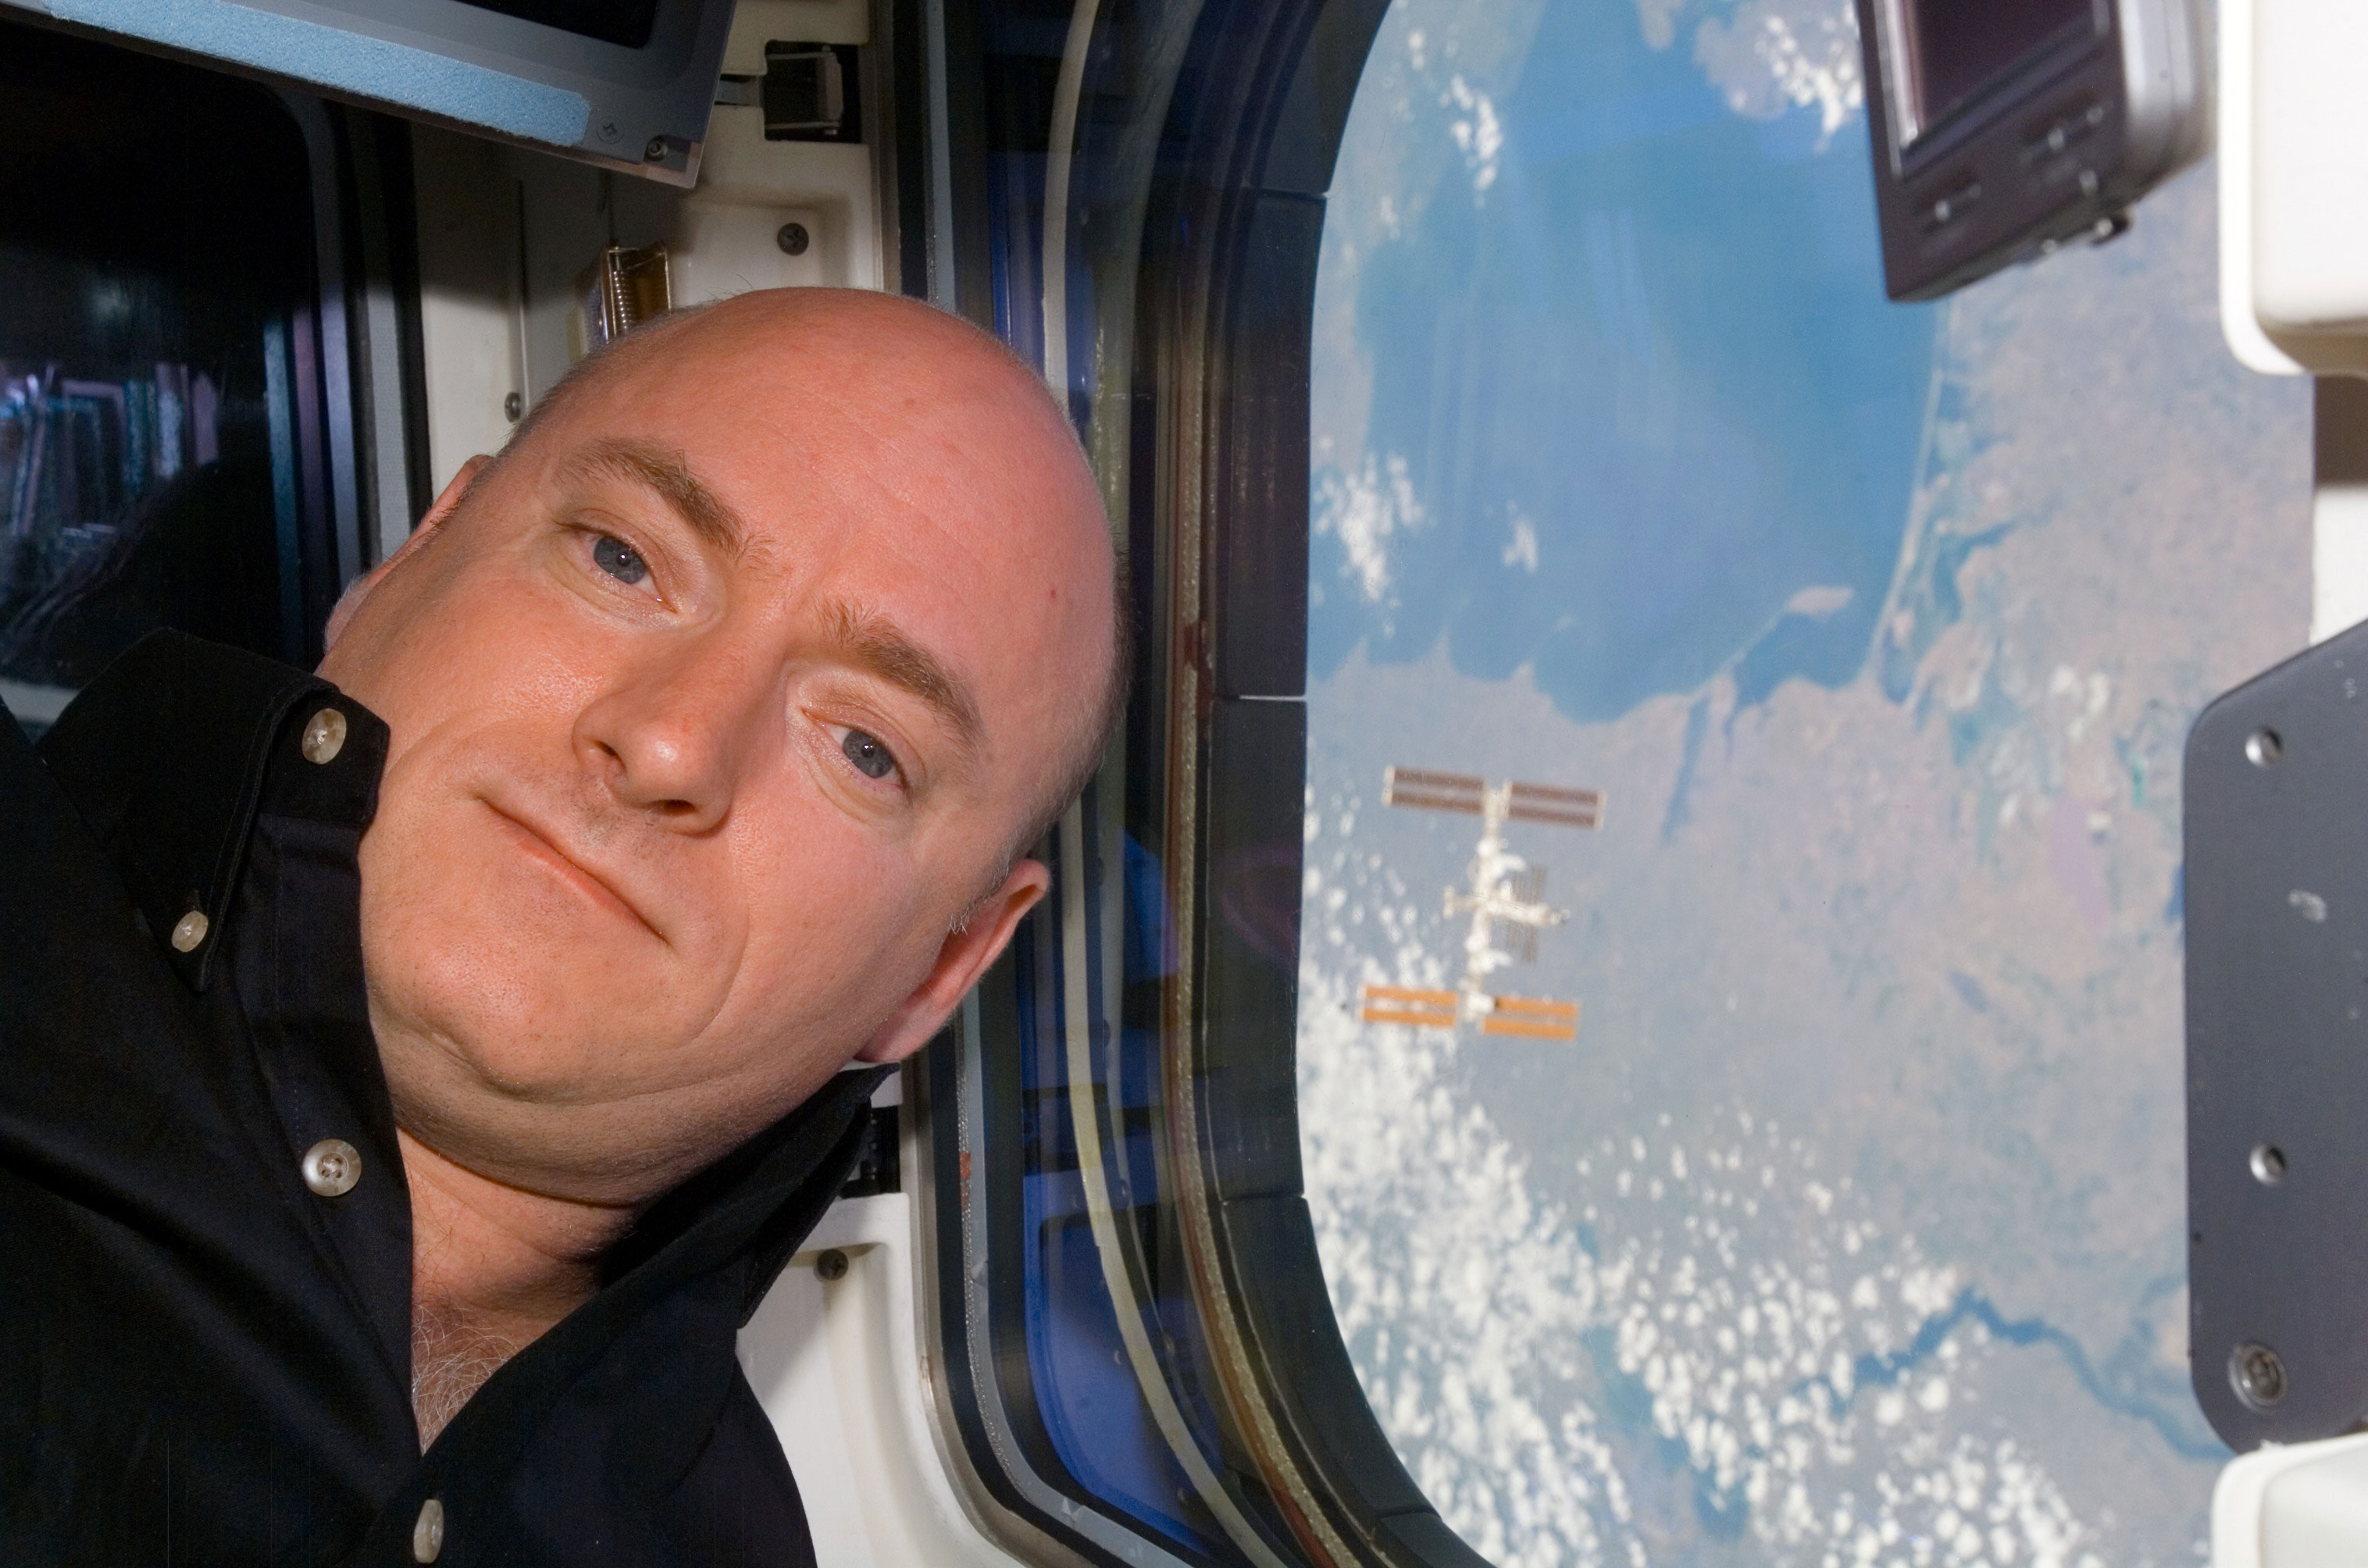 STS-118 Commander CDR Scott Kelly posing for a photo near a window on the Space Shuttle Endeavour. The International Space Station ISS is visible behind him. Credit: NASA